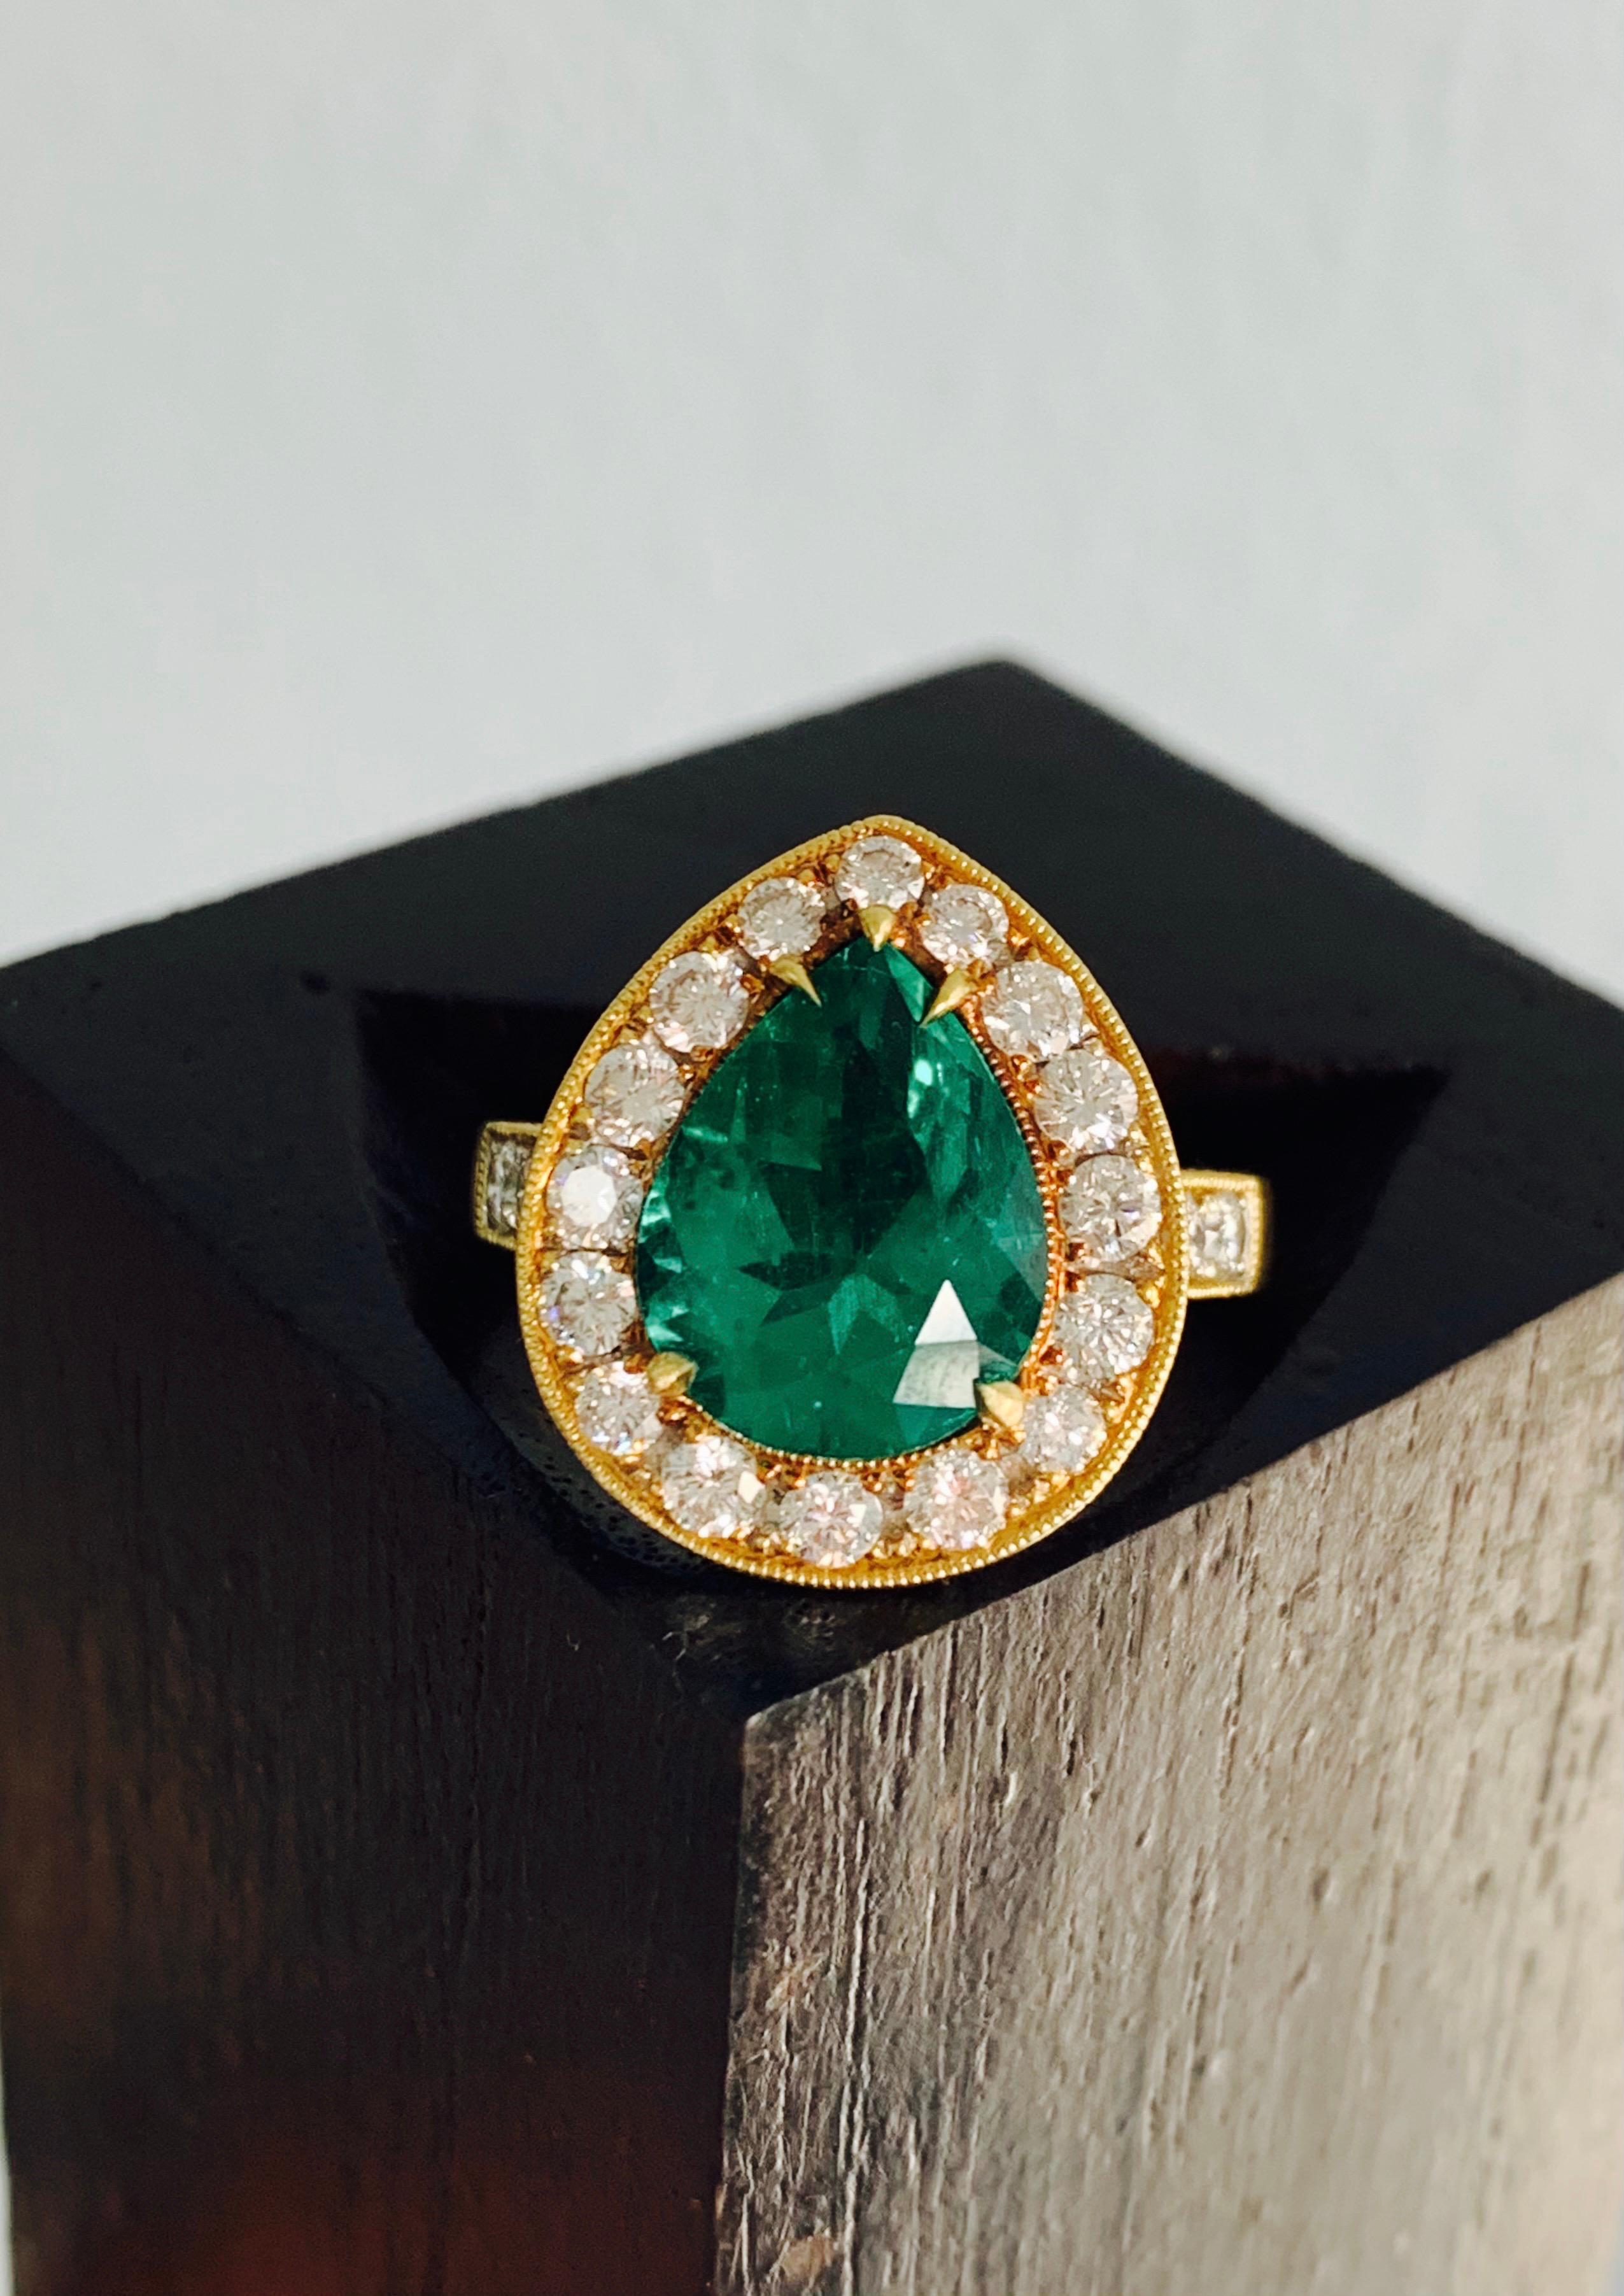 An extraordinary vivid green emerald displays an incredible depth of color and brilliance in this eye-catching ring.
The details are as follows : 
Emerald weight : 3.25 carat ( vivid green color) 
Diamond weight : 1.01 carat ( GH color)
Metal : 18K